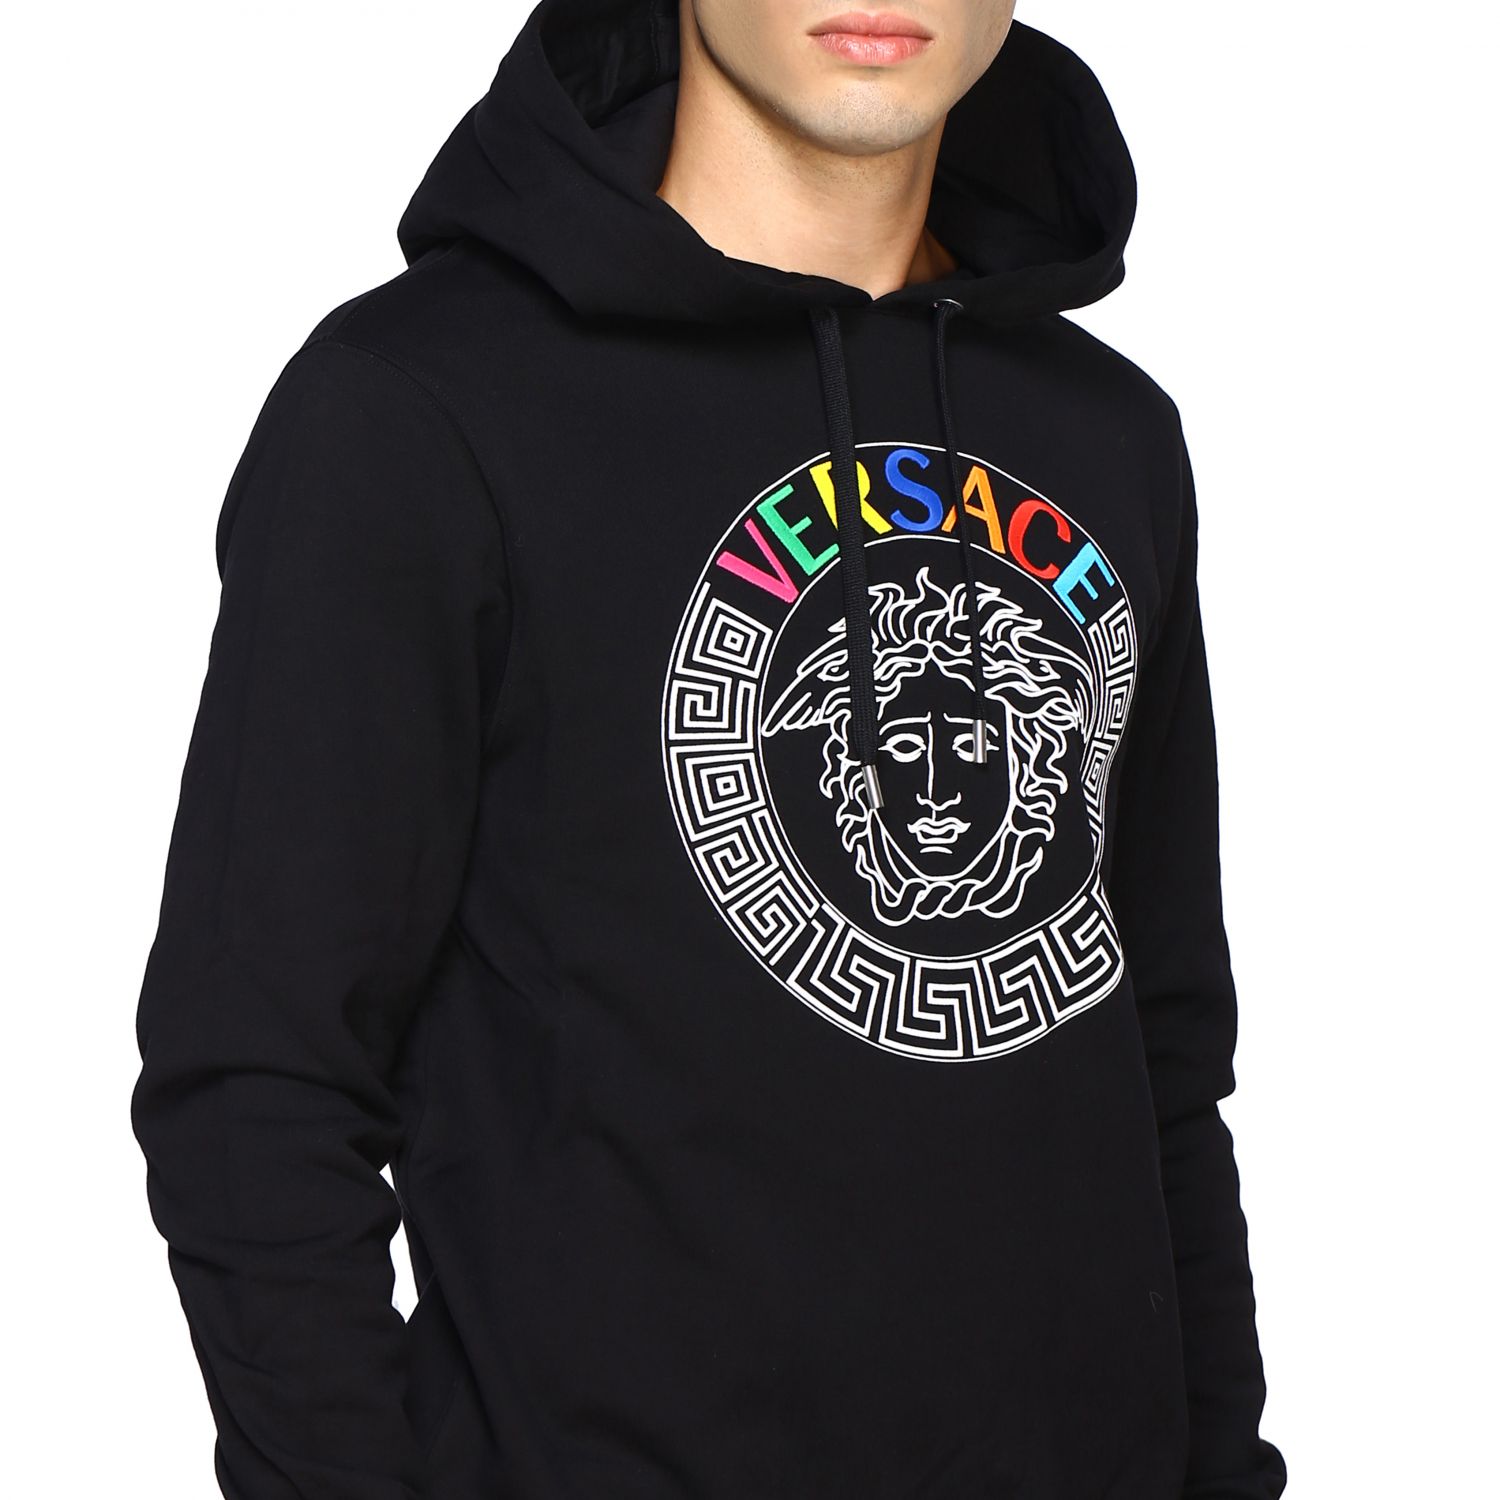 Versace Outlet: Sweater men | Sweater 